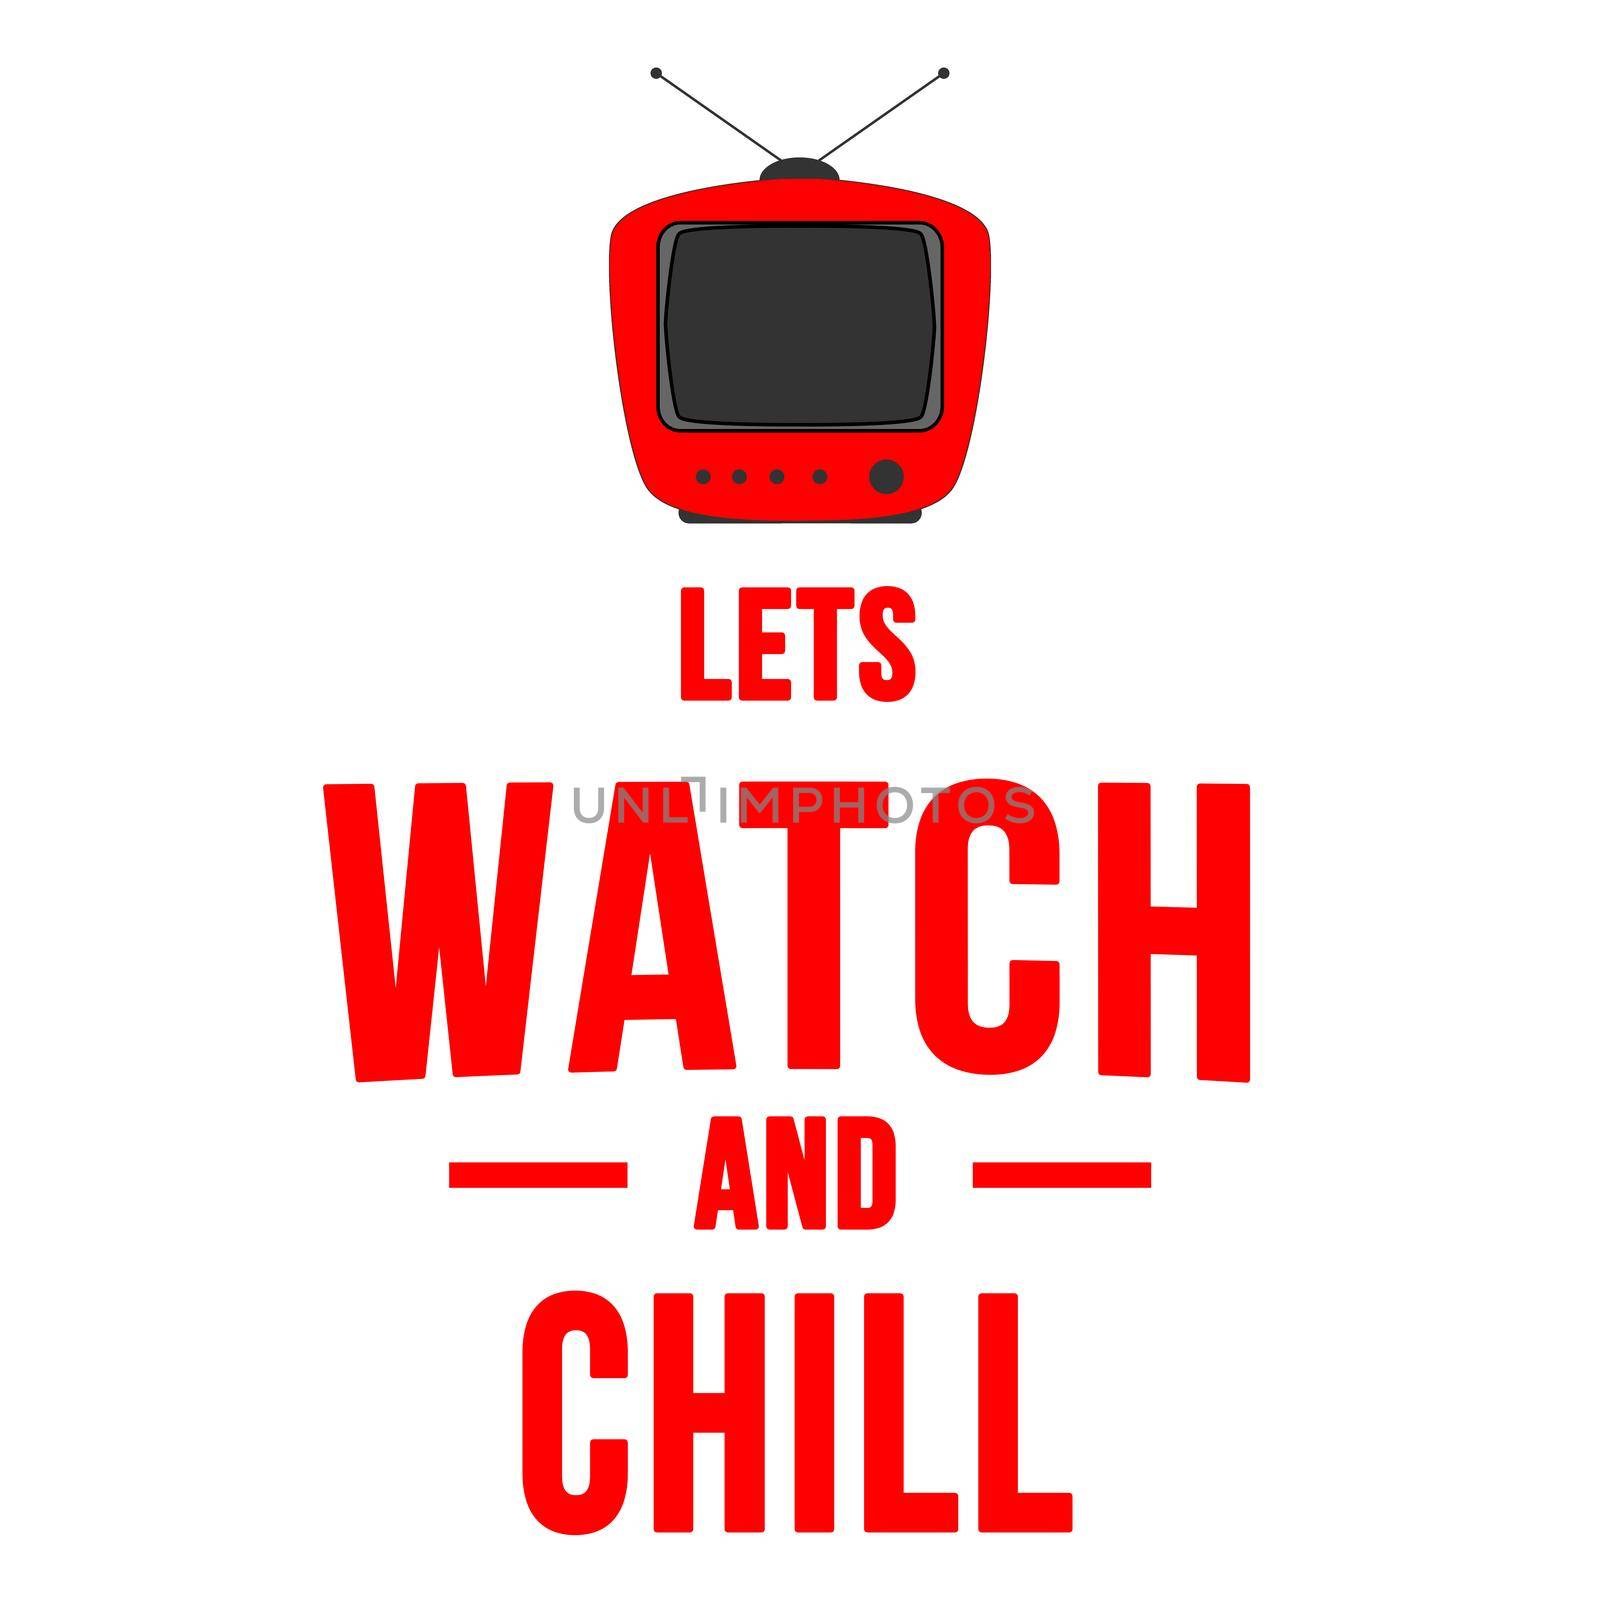 A red television with the text "Lets Watch and Chill".